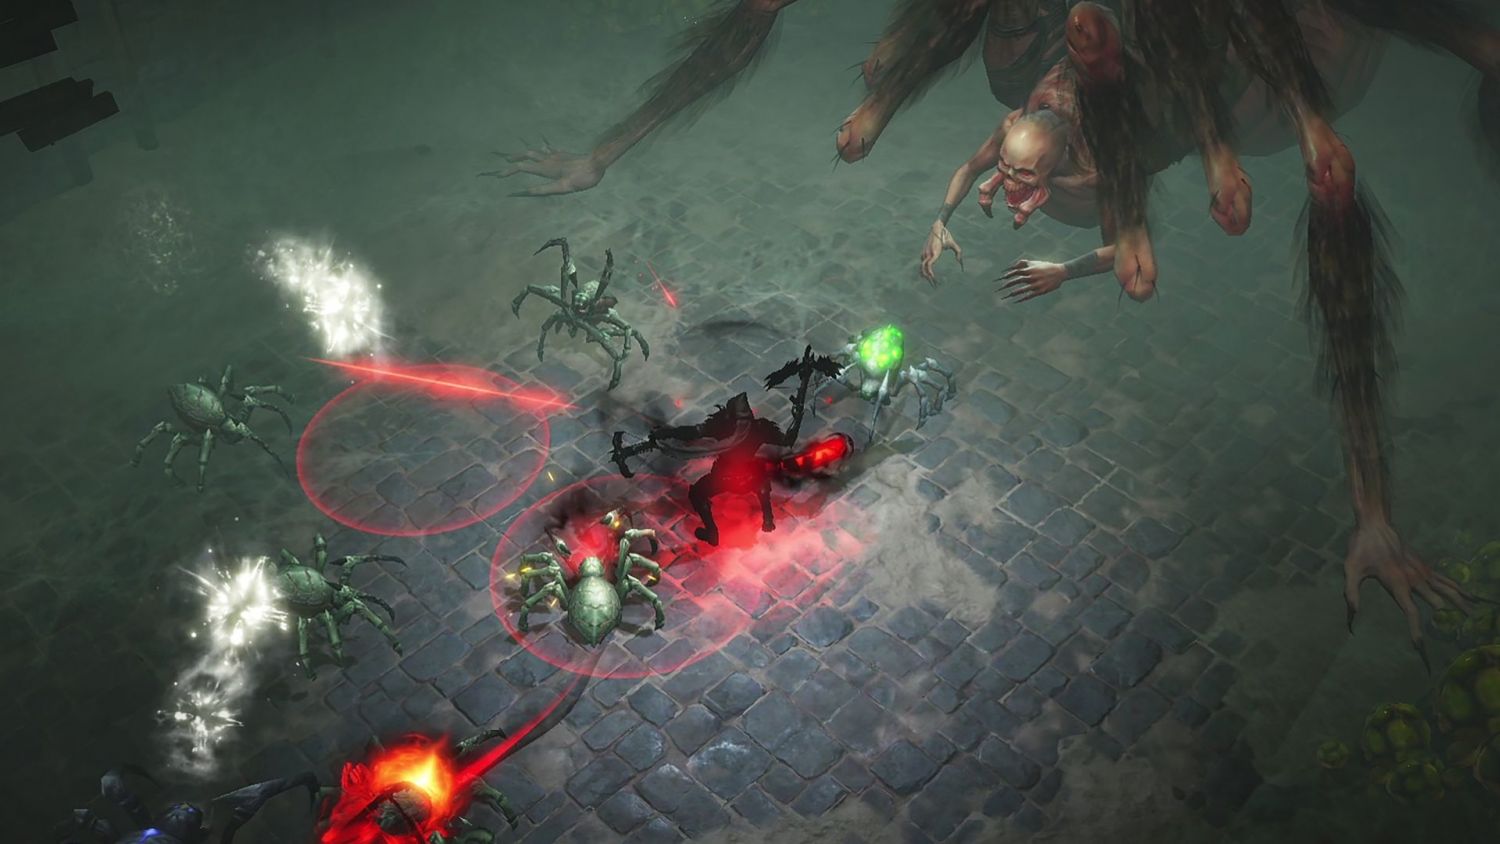 Blizzard Announces Diablo Immortal for iOS and Android, Fans Shocked